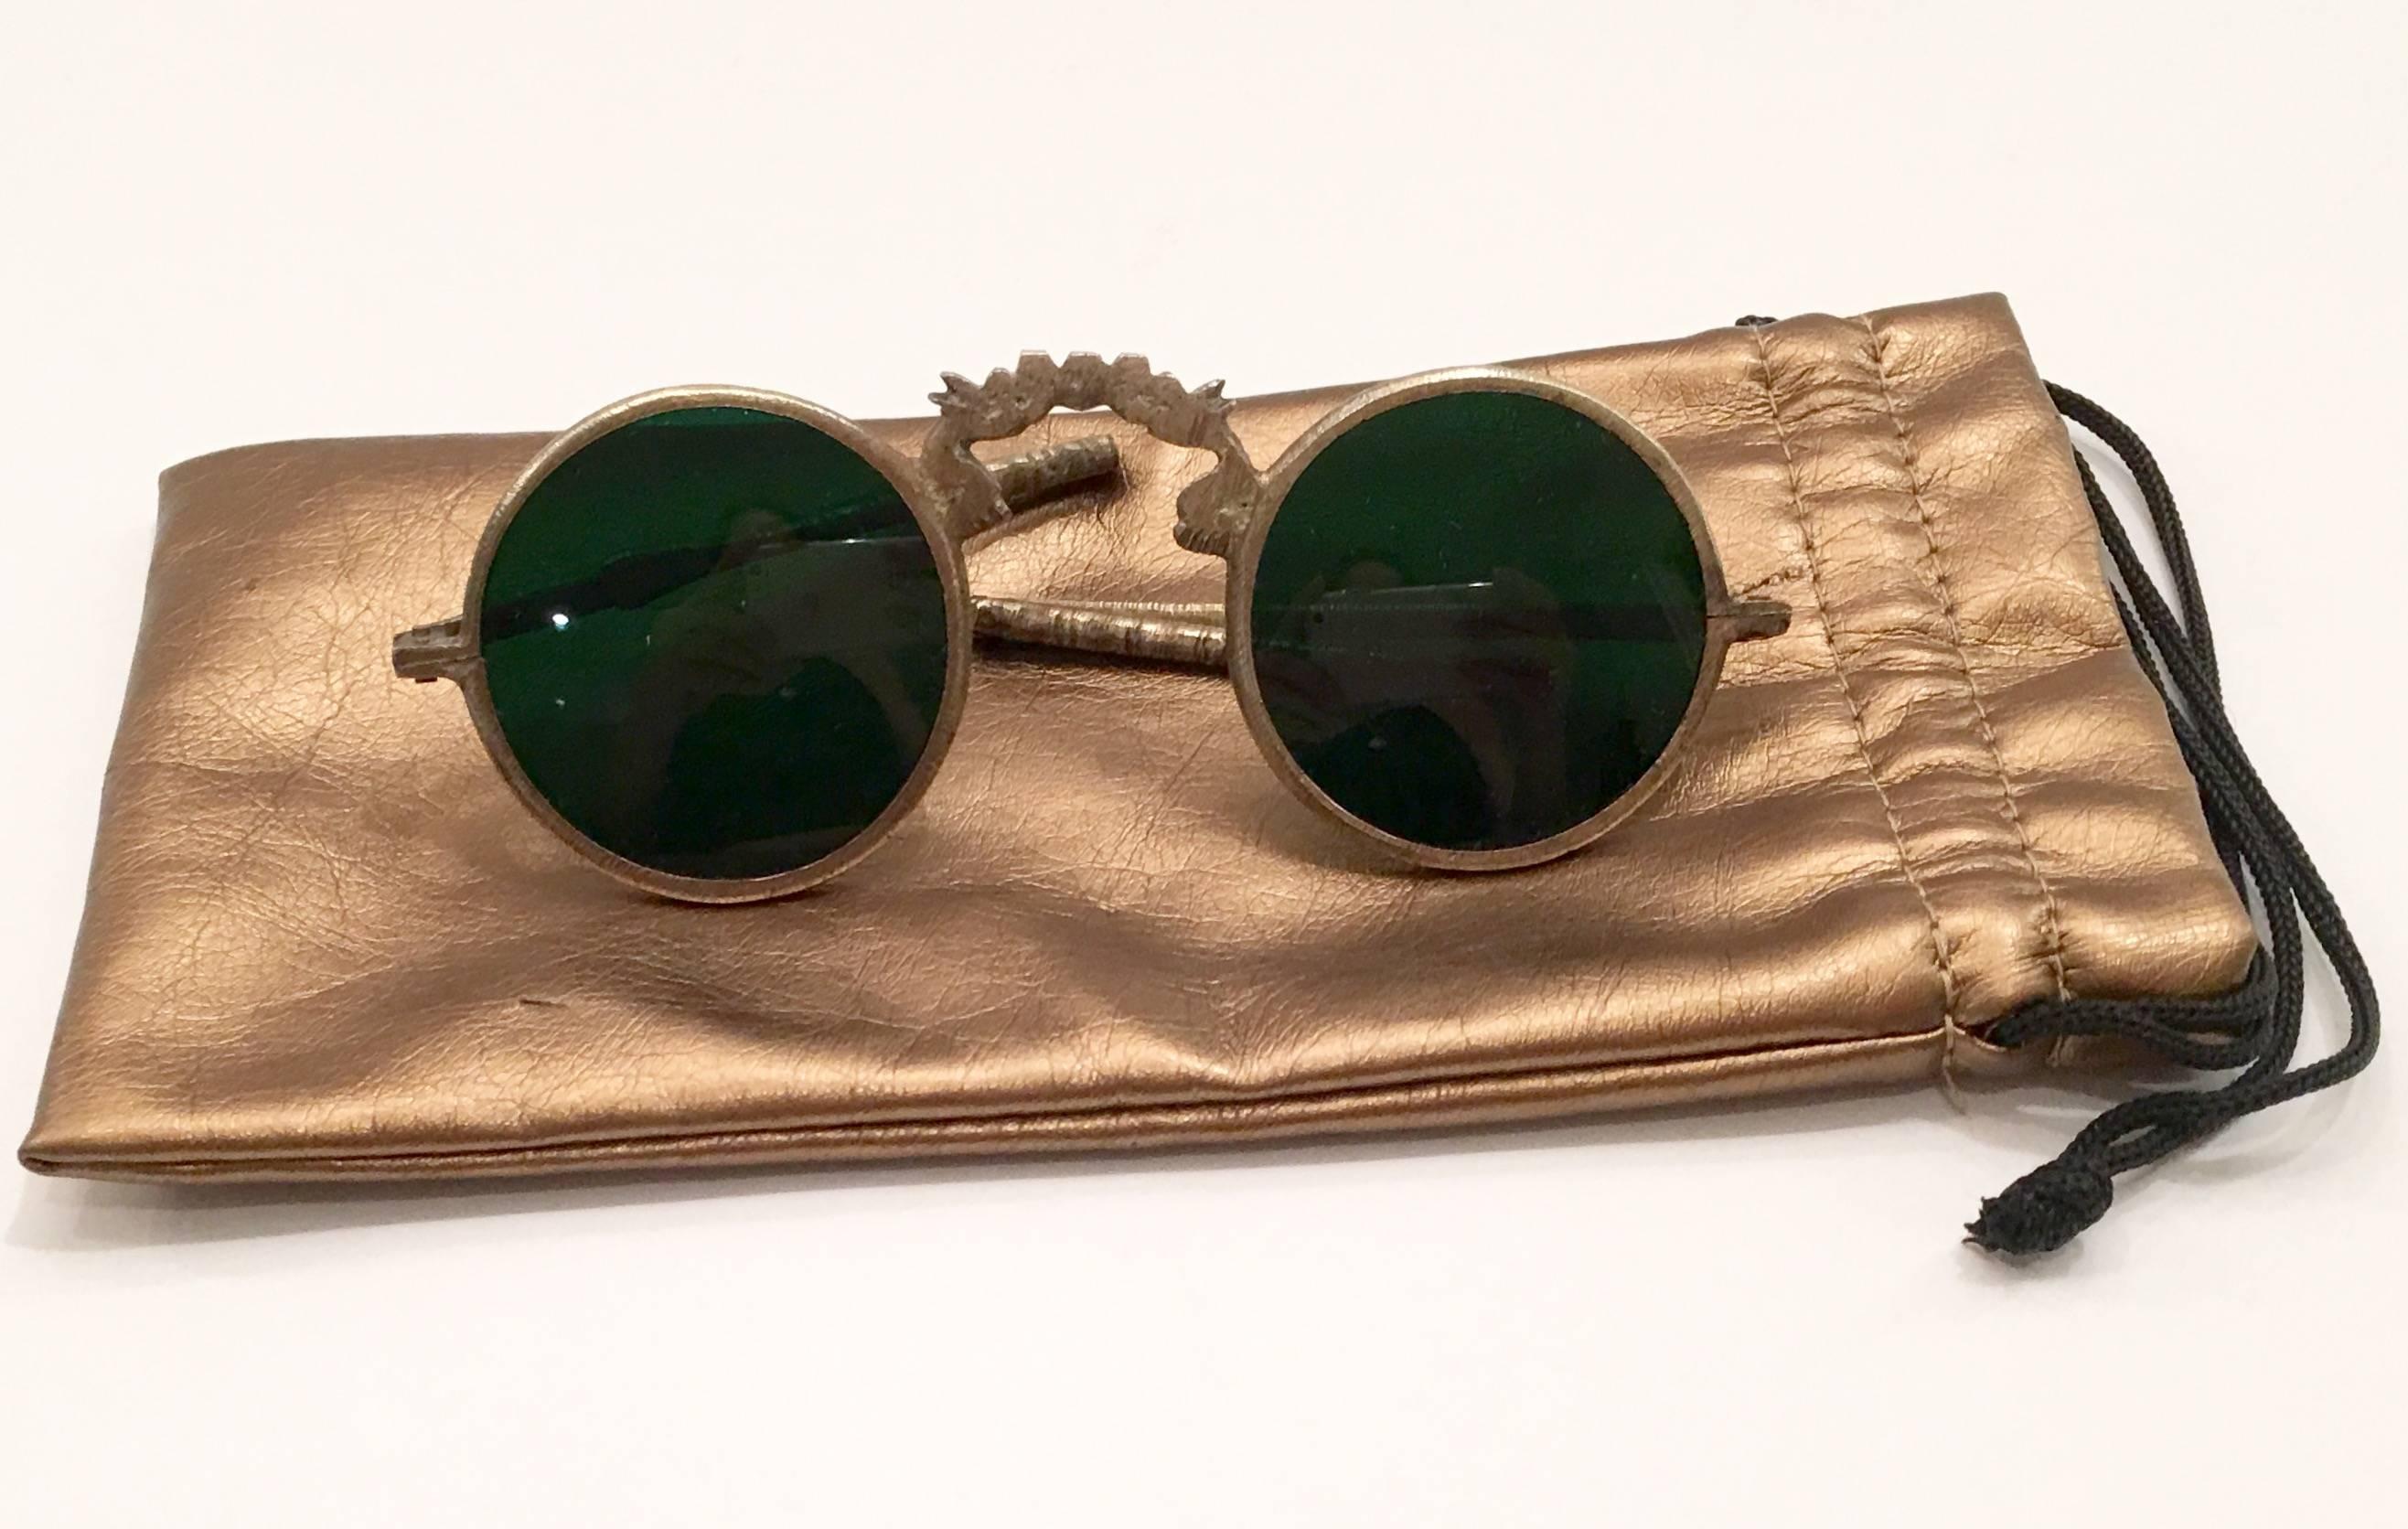 Rare 1800s antique Chinese folding sunglasses made of brass with a small part of silver nickel. Green glass lens color and dragon motif at bridge. Includes a gold metallic soft protective storage case.